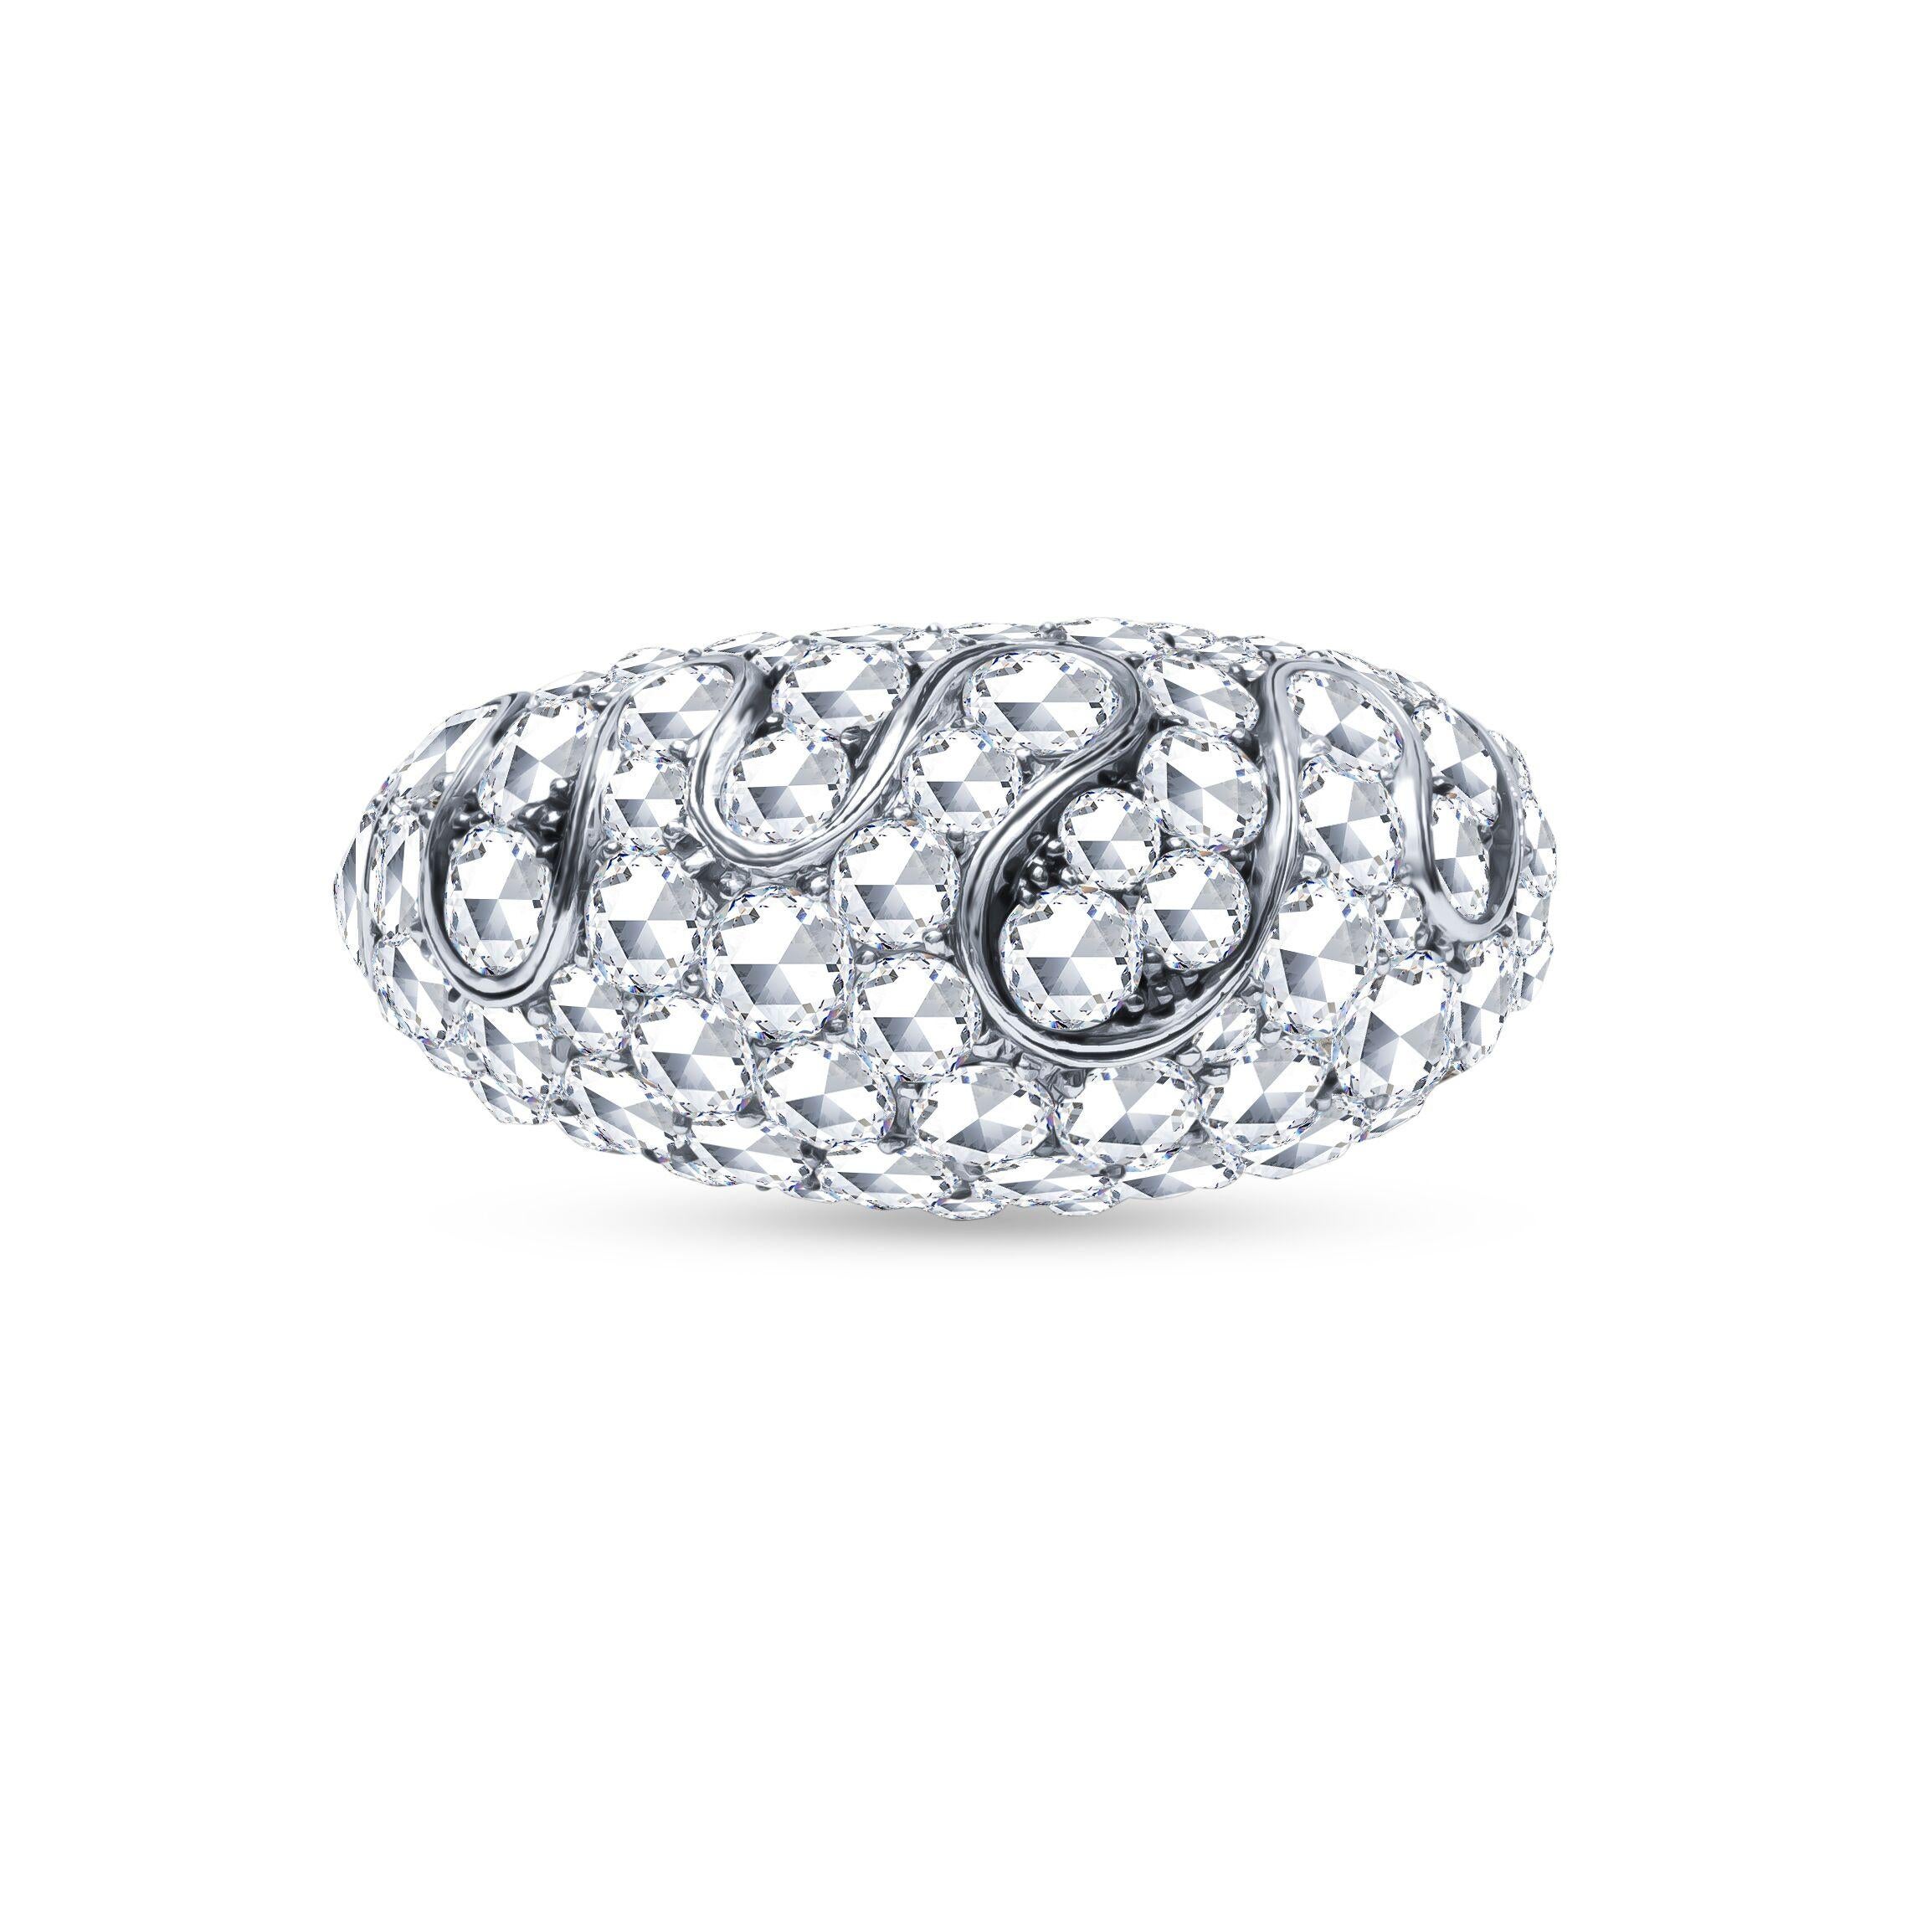 Details:

Estate 18K White Gold 6.73 CTW Diamond Domed Size 7.5 Band Ring 11 Grams

The Ring Consists Of Round Natural Diamonds, Weighing Approximately 6.73 Carat Total Weight. 
Color Grade: F-G
Clarity Grade: VS1-SI1


Total Carat Weight: 6.73 CTW